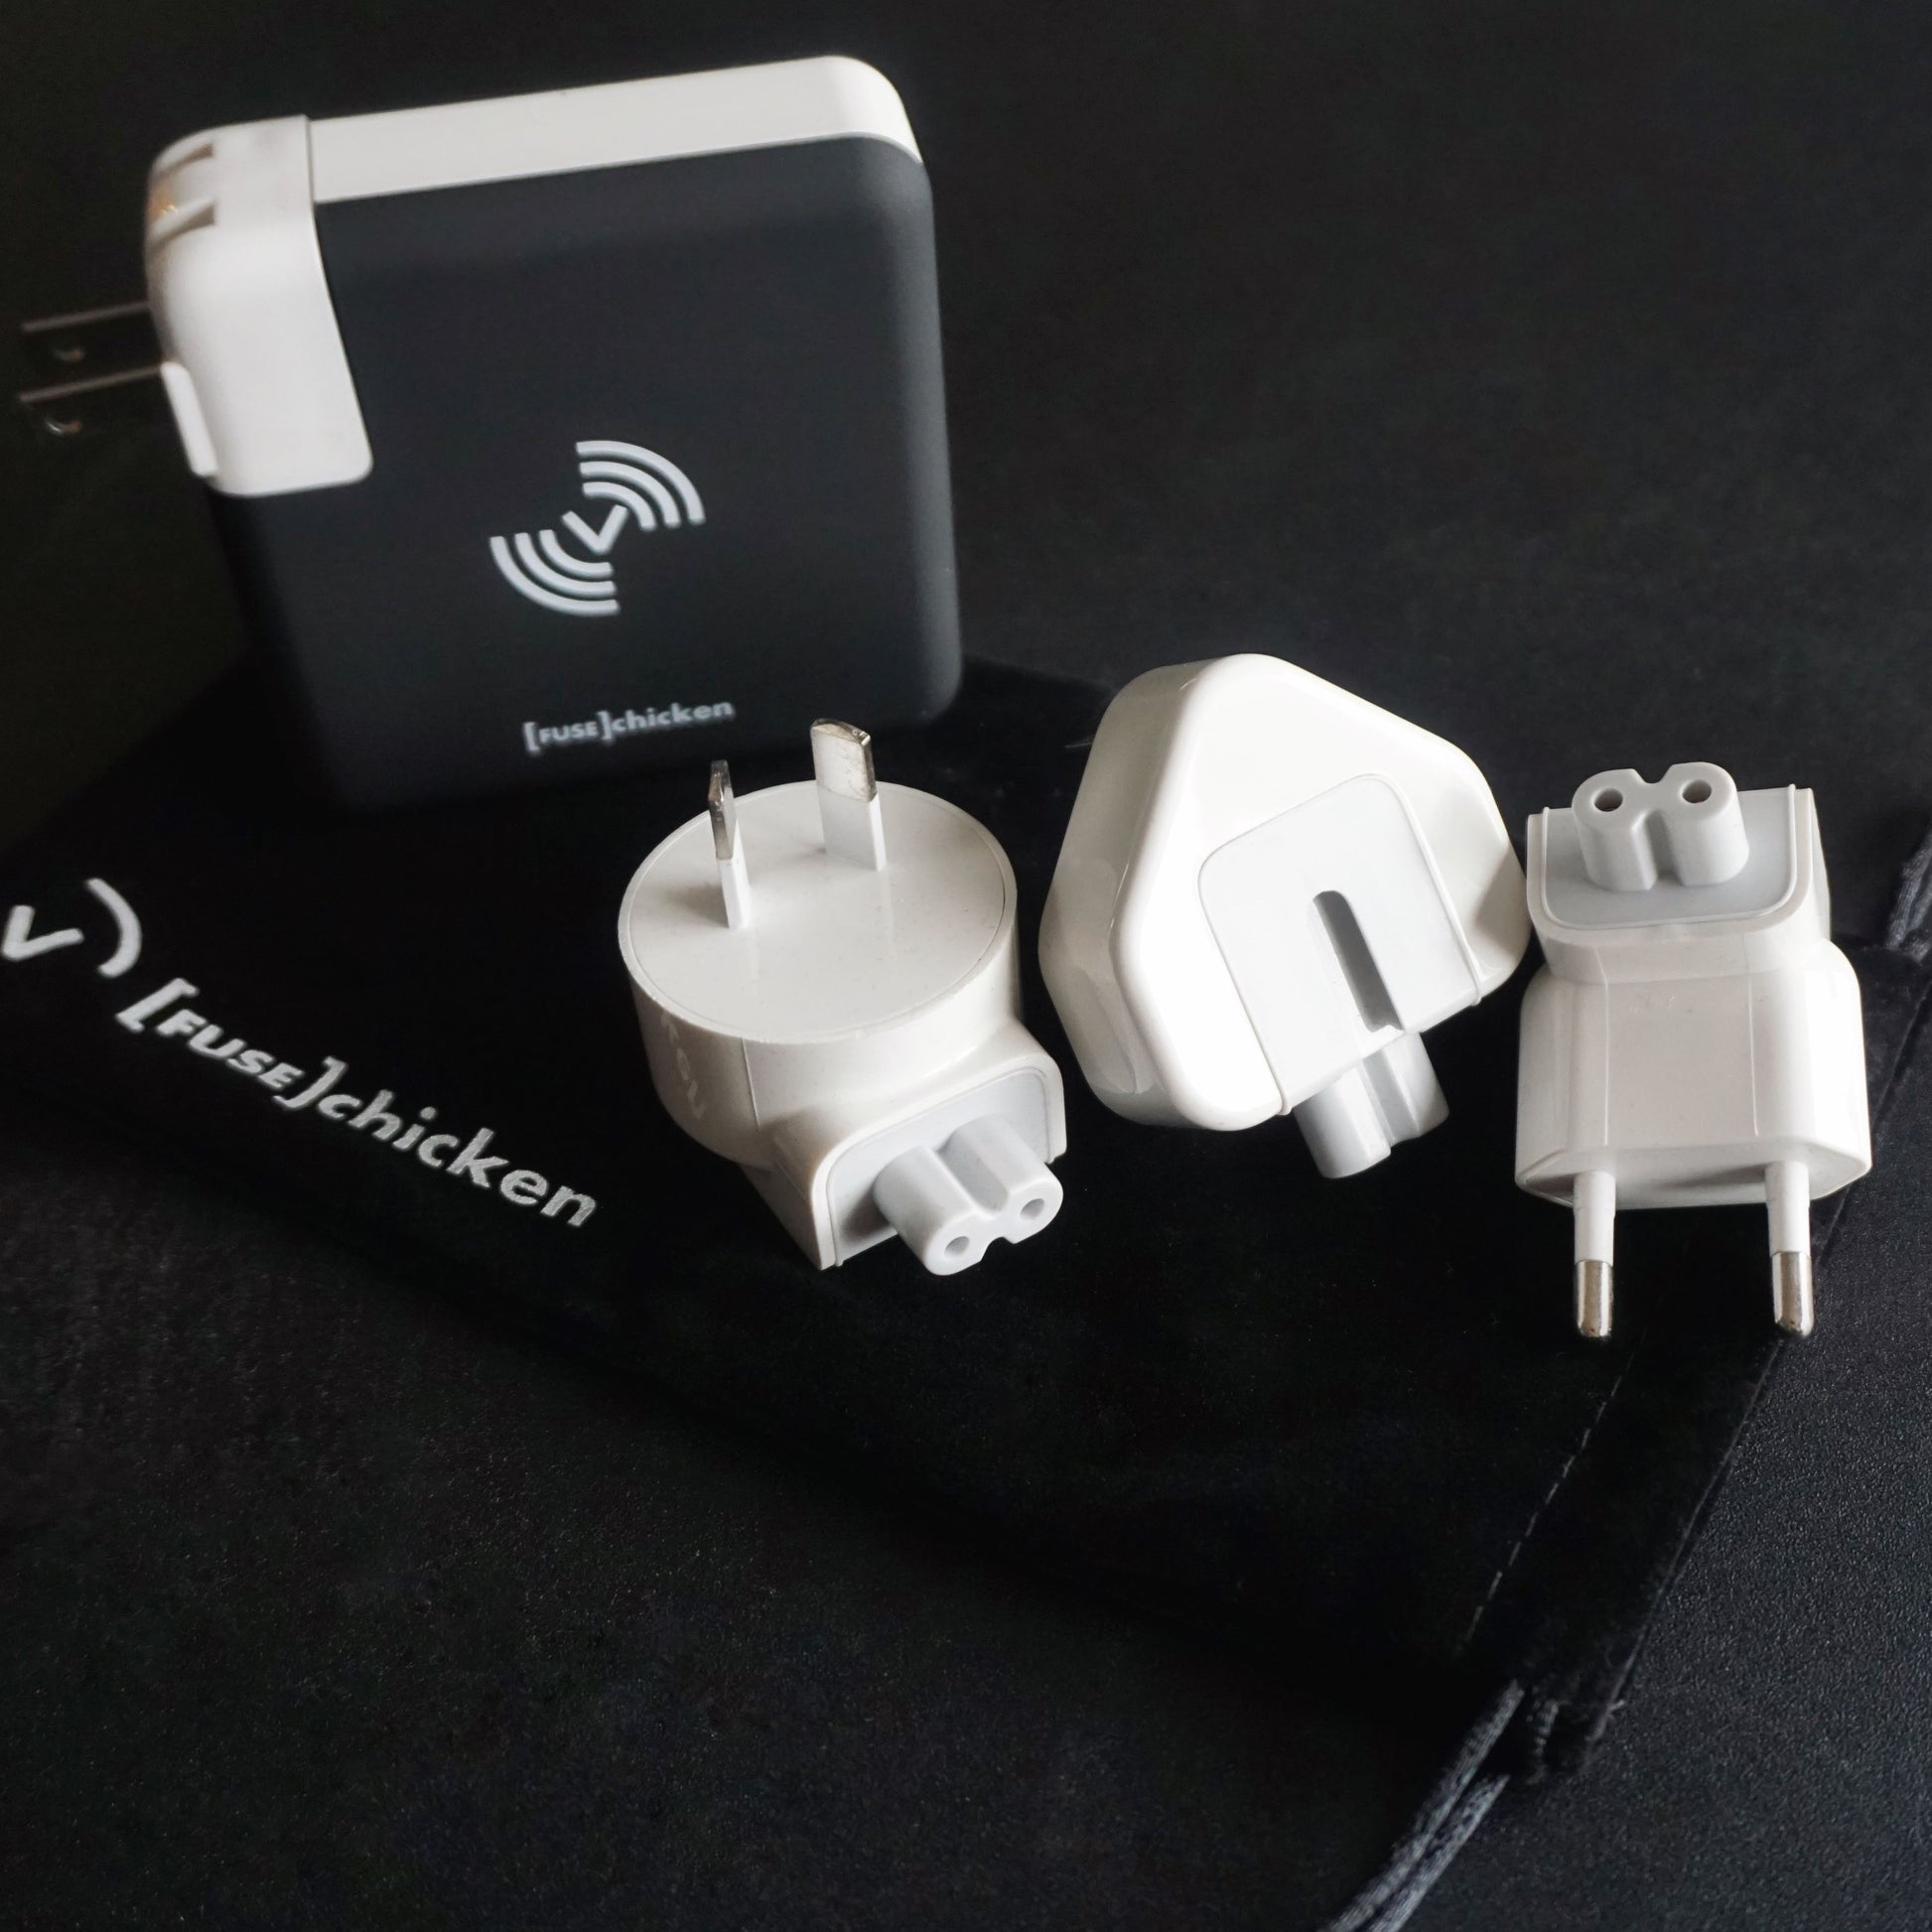 ClickCharge MagSafe Wireless PowerBank – [Fuse]Chicken